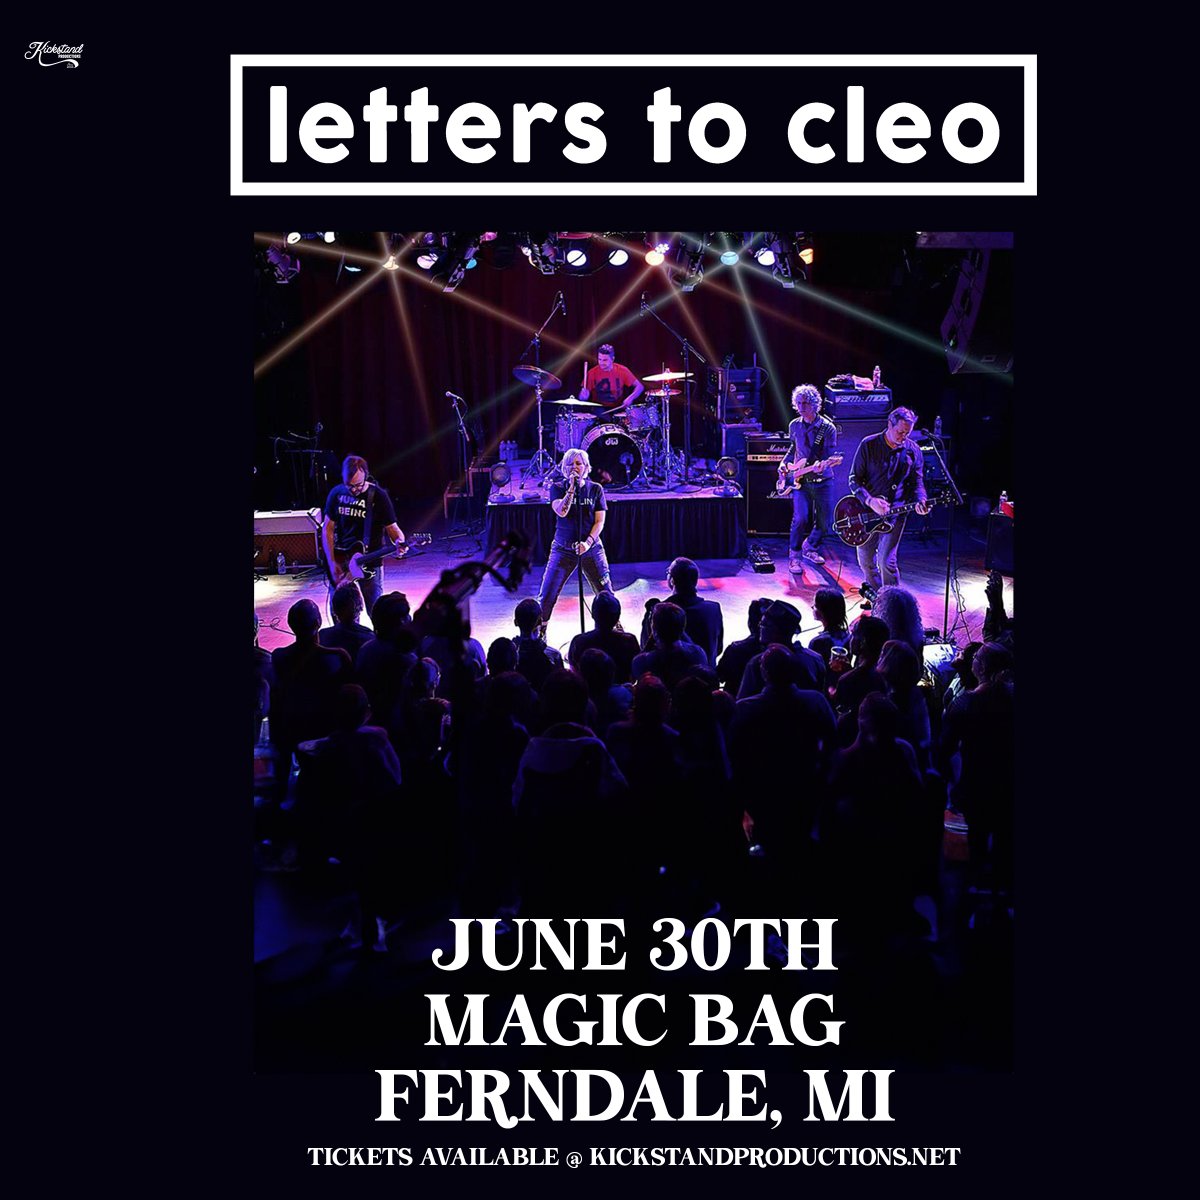 ✨ JUST ANNOUNCED ✨

@LettersToCleo at @themagicbag (MI) on Sun., June 30!

🎟 Tickets on sale TOMORROW at 10AM ET >> bit.ly/3UBOo98